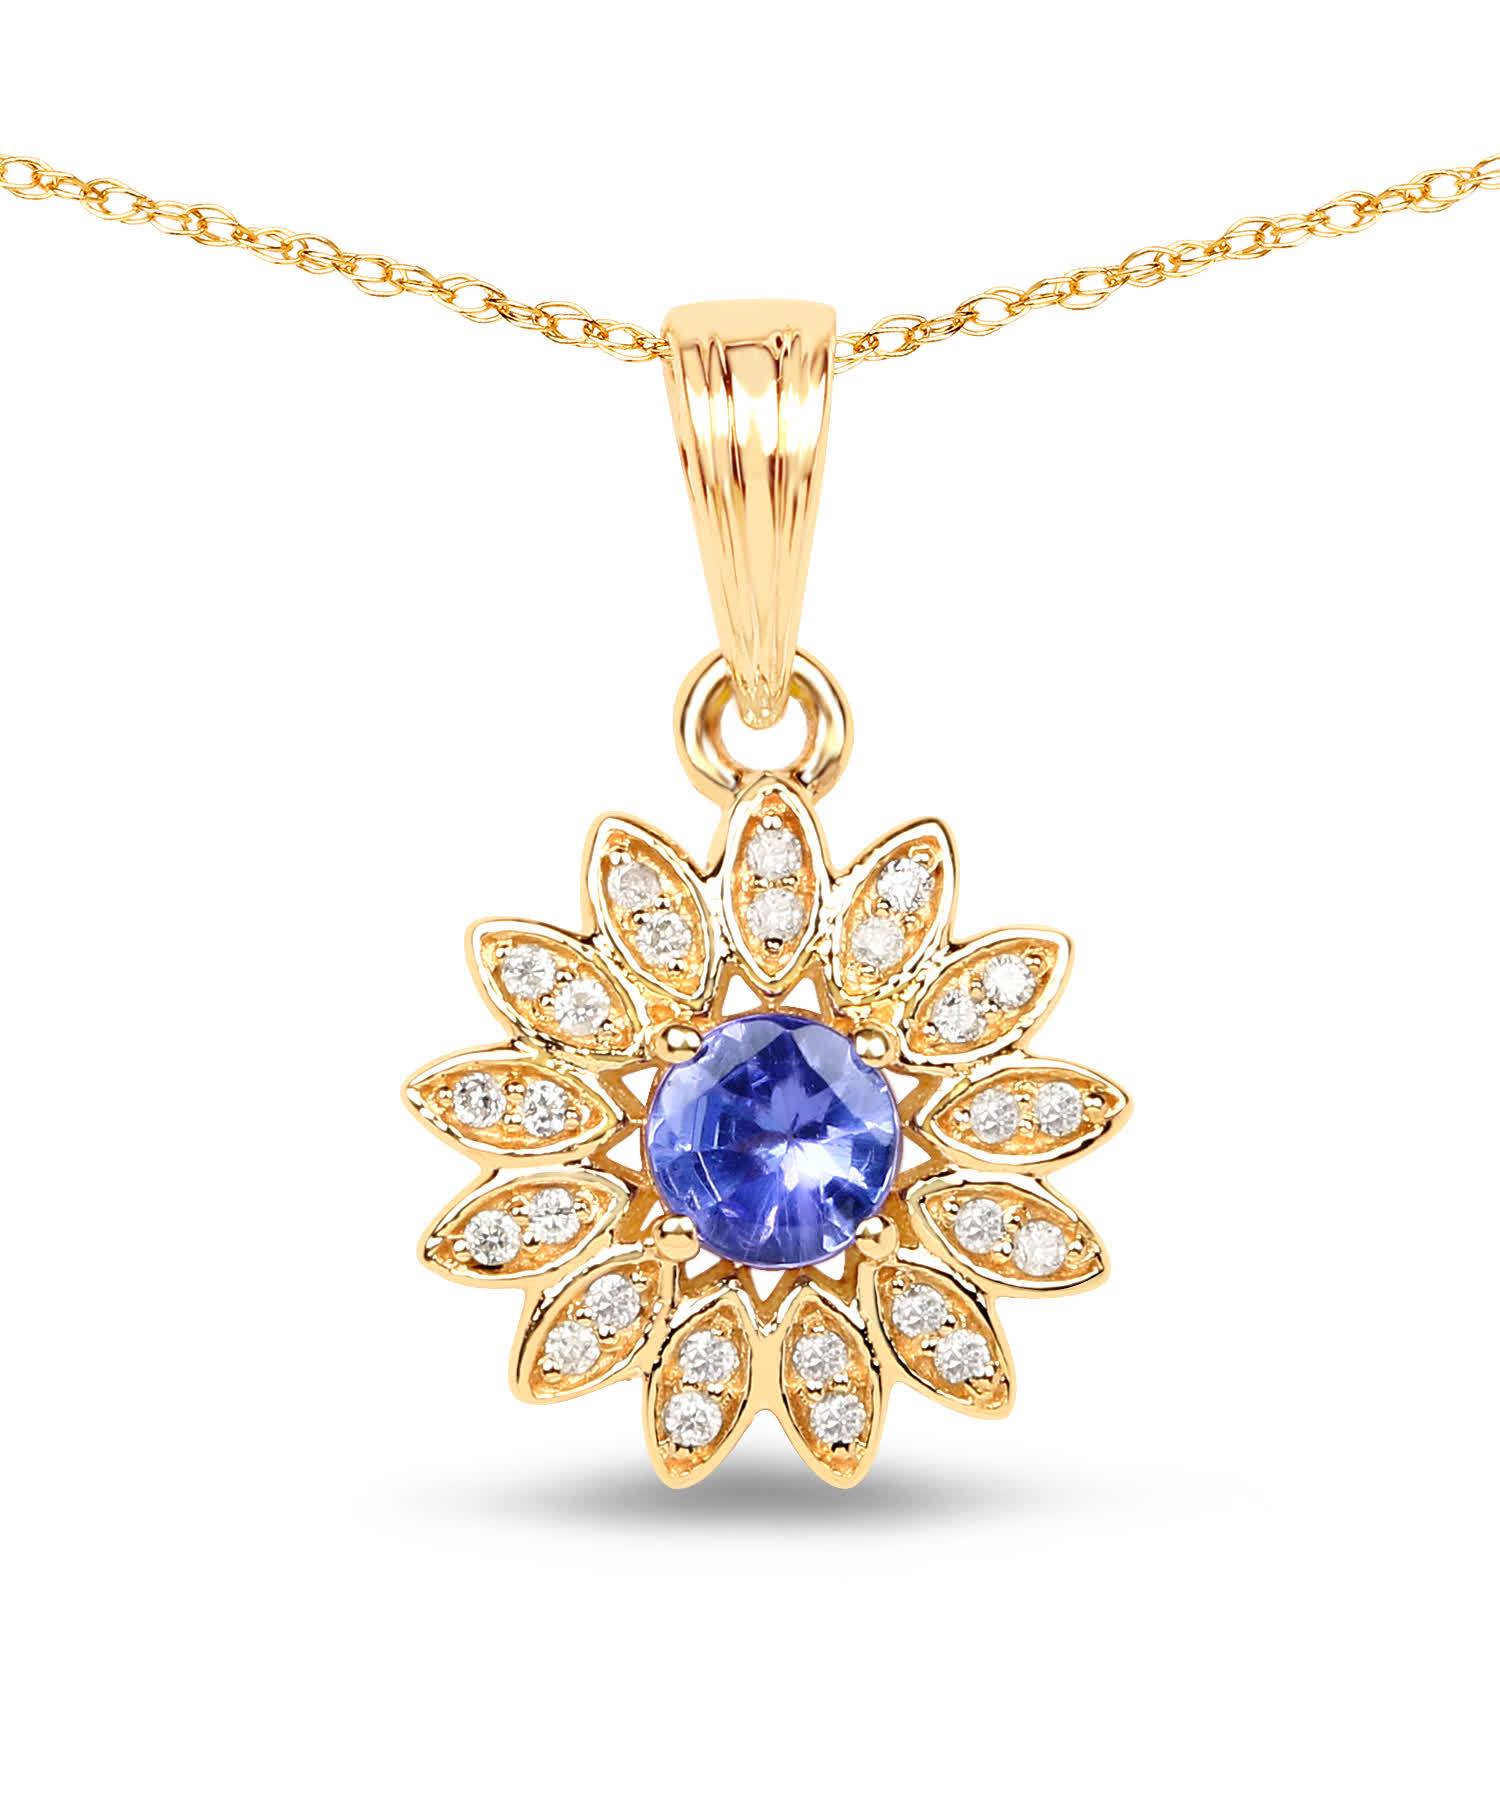 0.31ctw Natural Tanzanite and Diamond 14k Gold Flower Pendant With Chain View 1